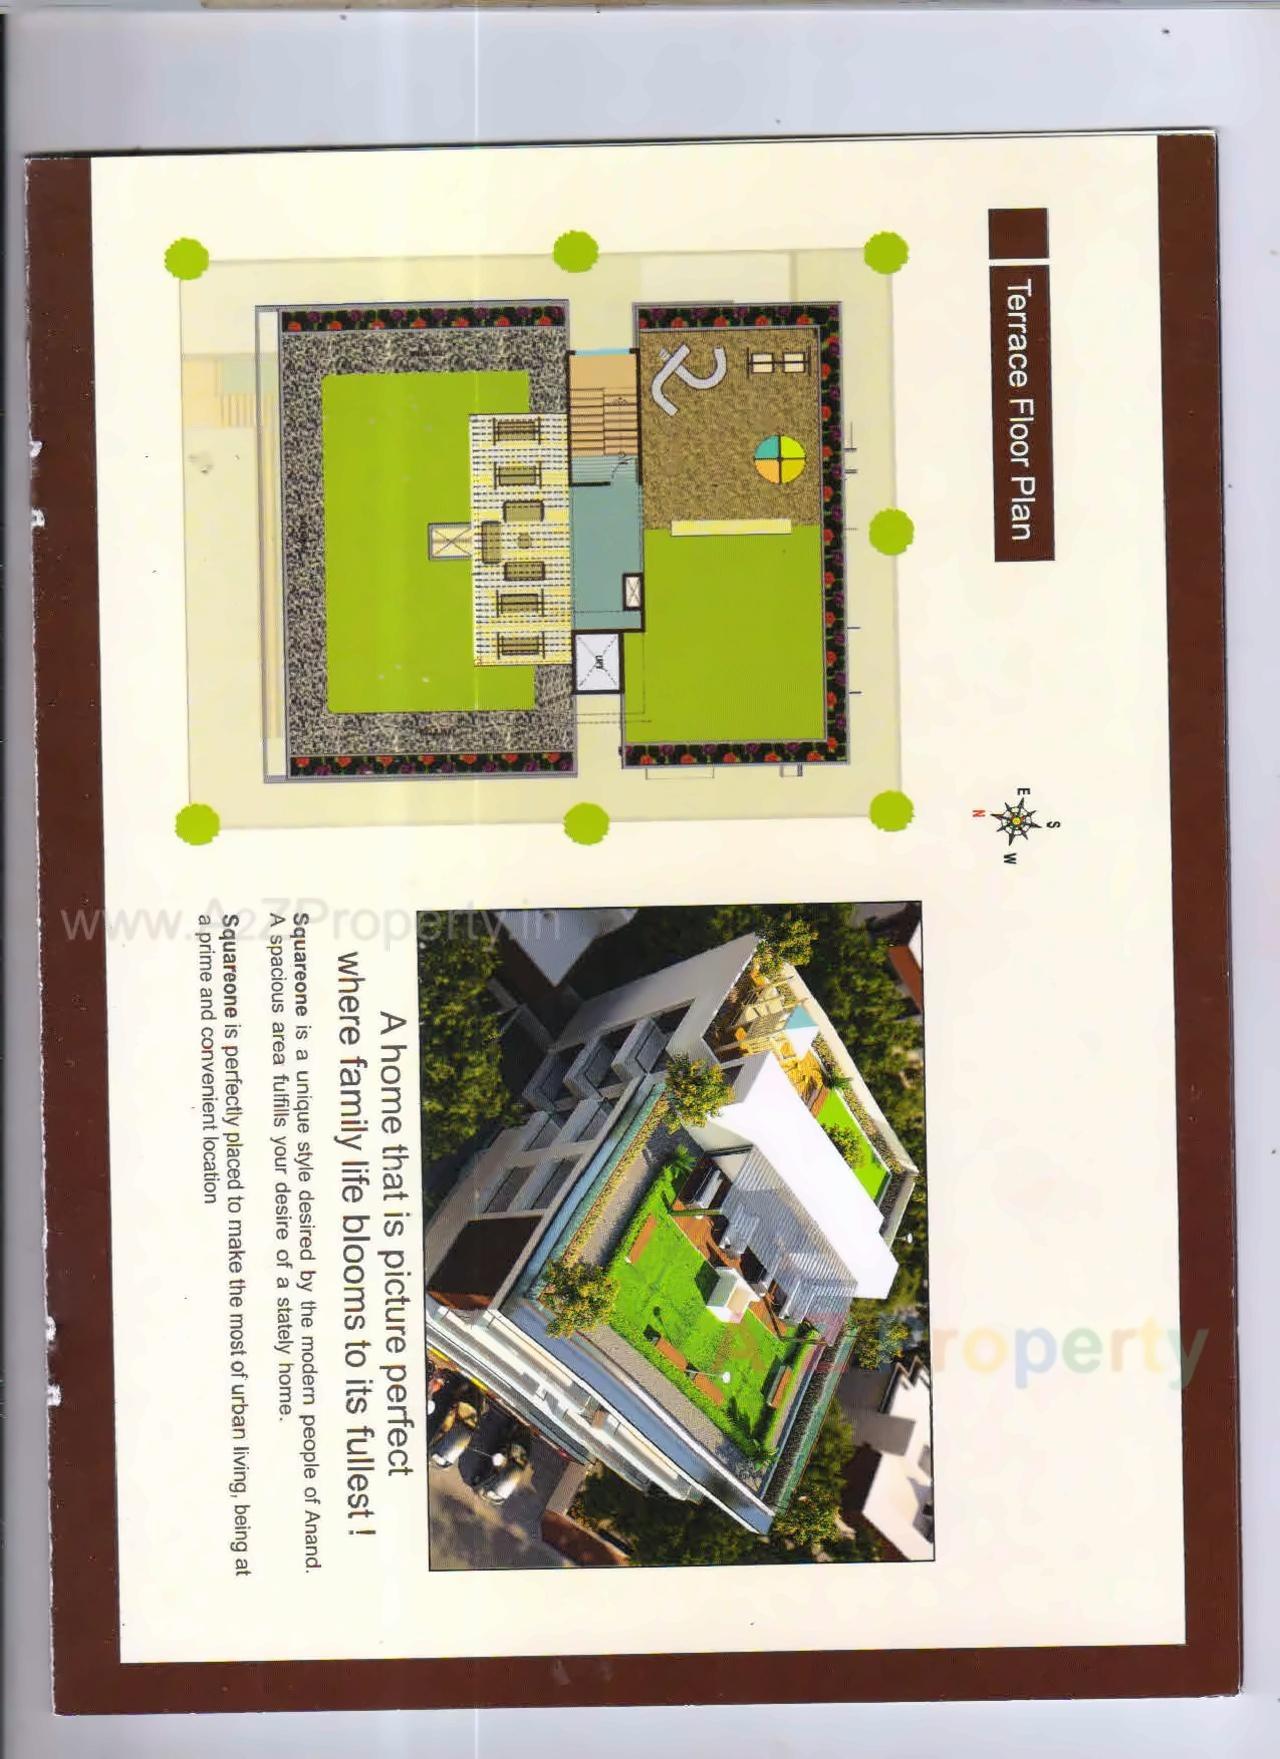 Square One  2 BHK Flats, 3 BHK Flats at Vallabh-vidhyanagar, Anand